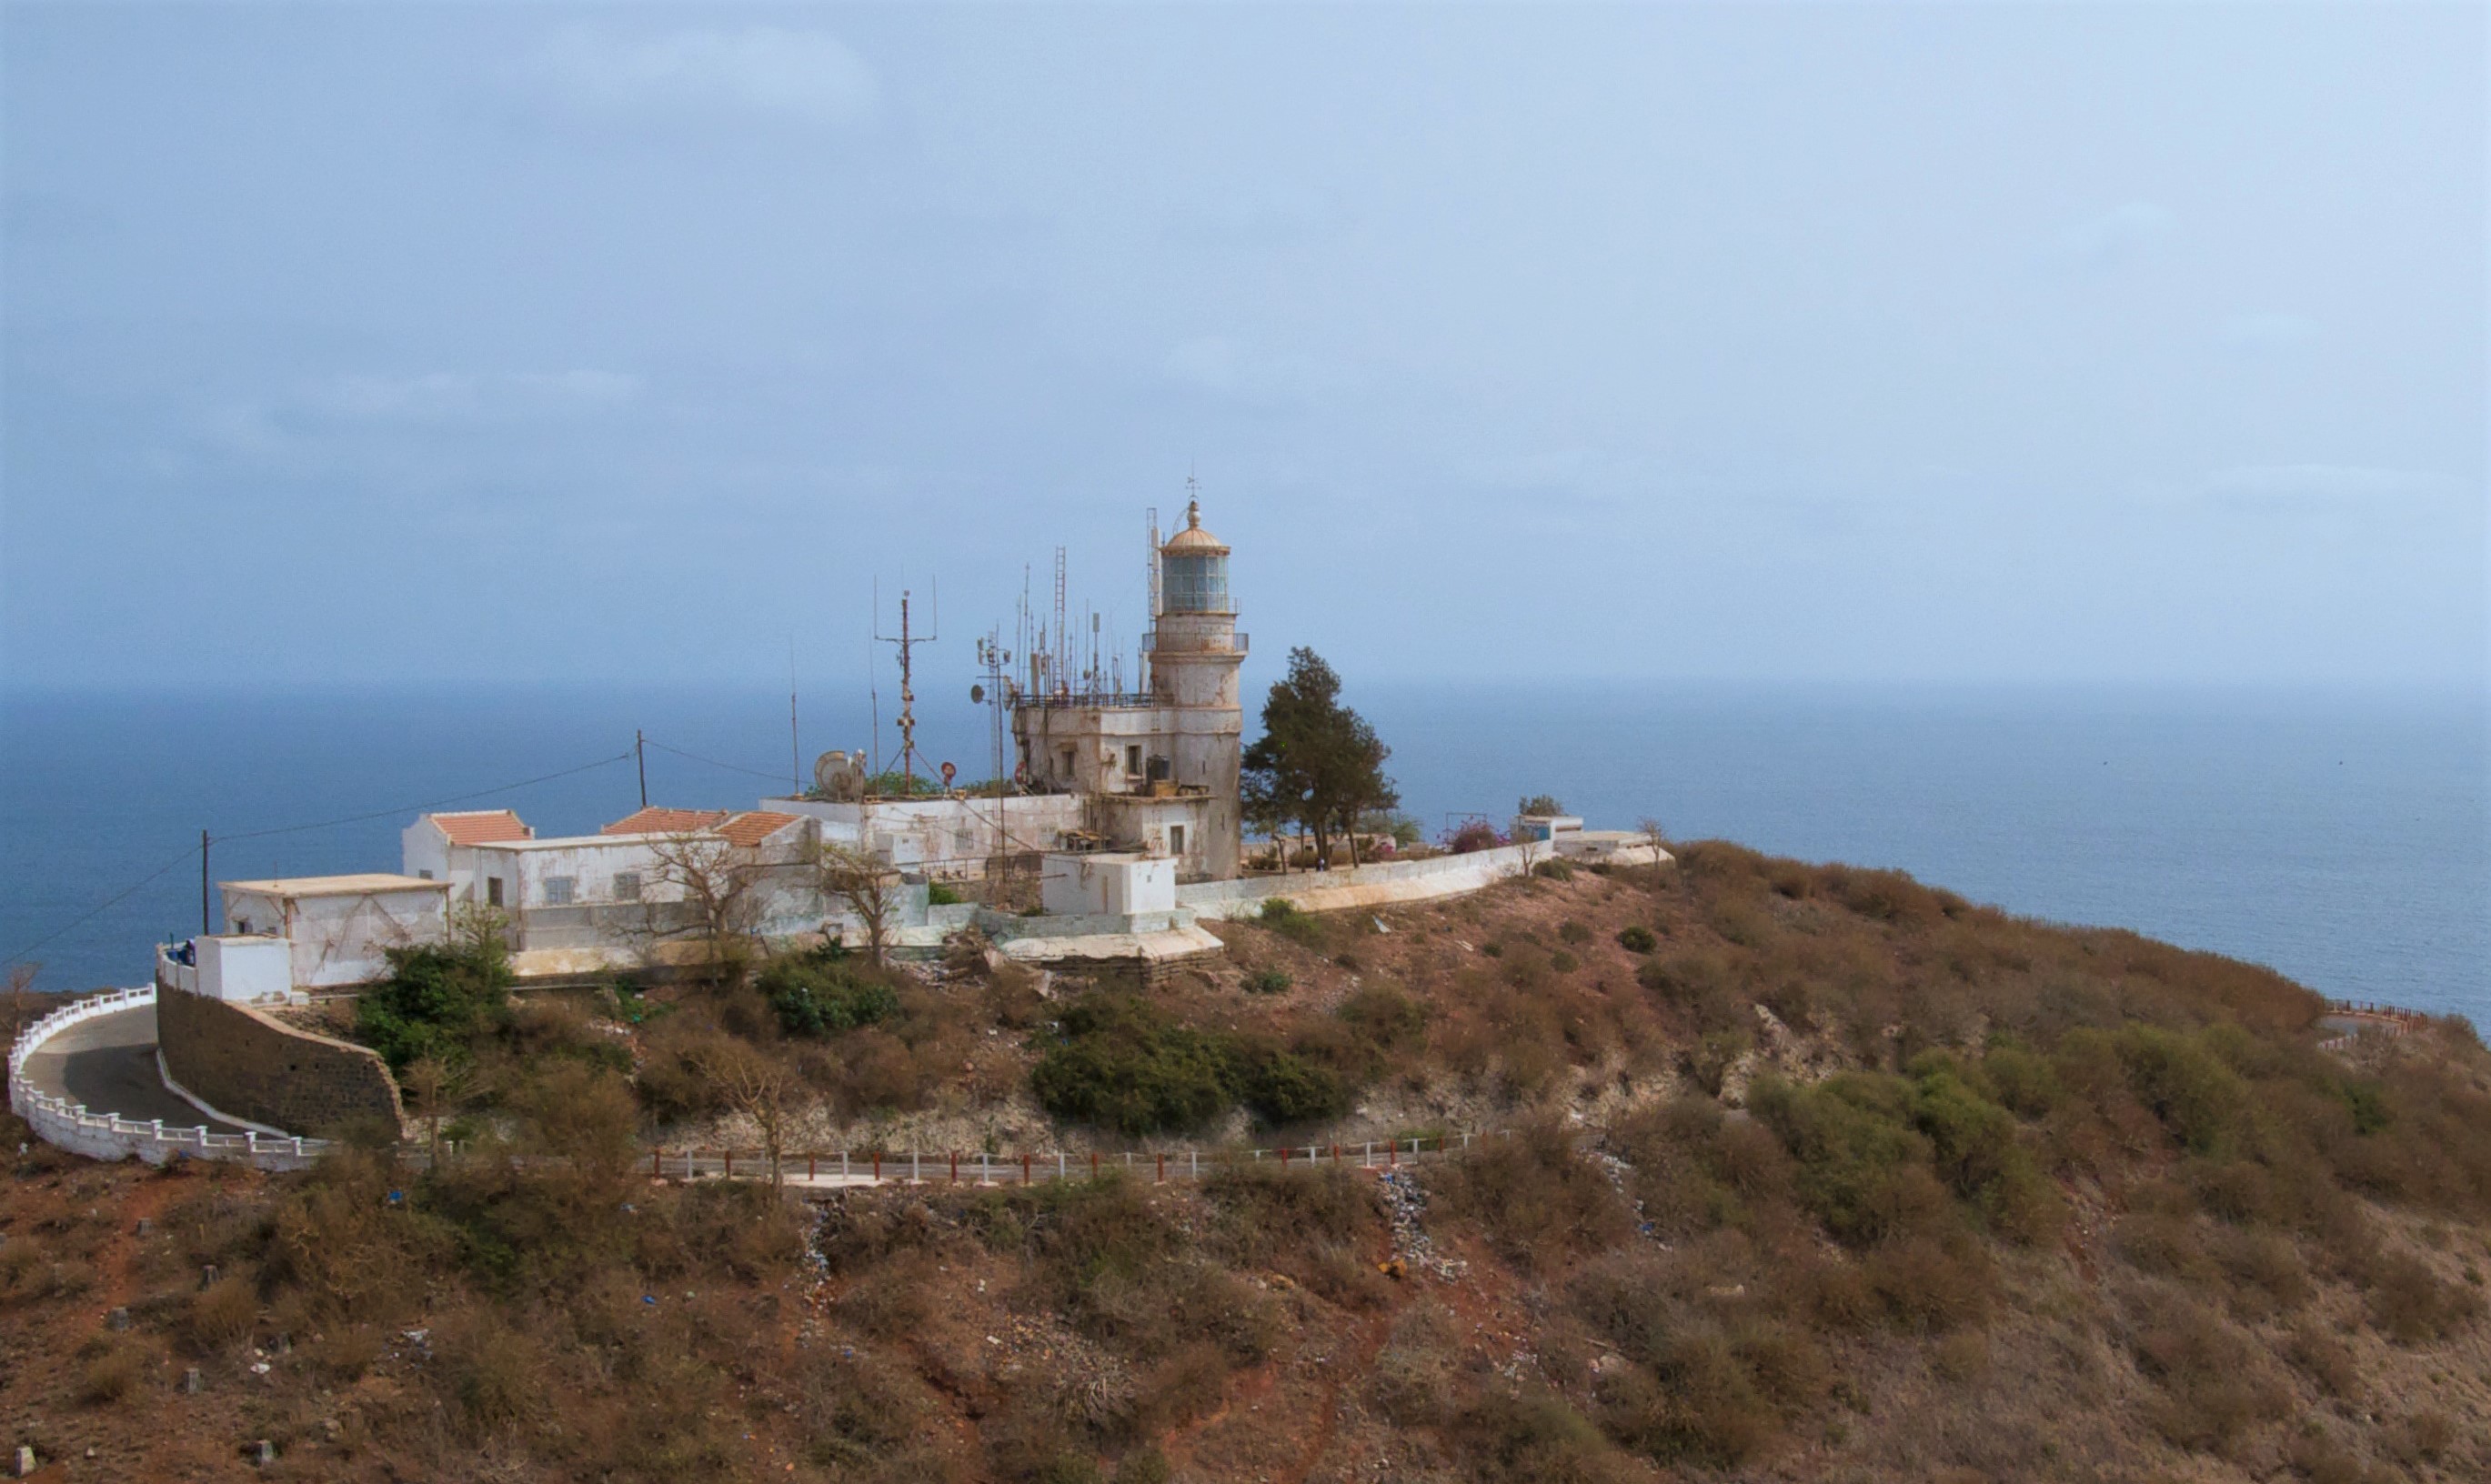 Les Mamelles Lighthouse - pic credit Jeff Attaway Wikimedia